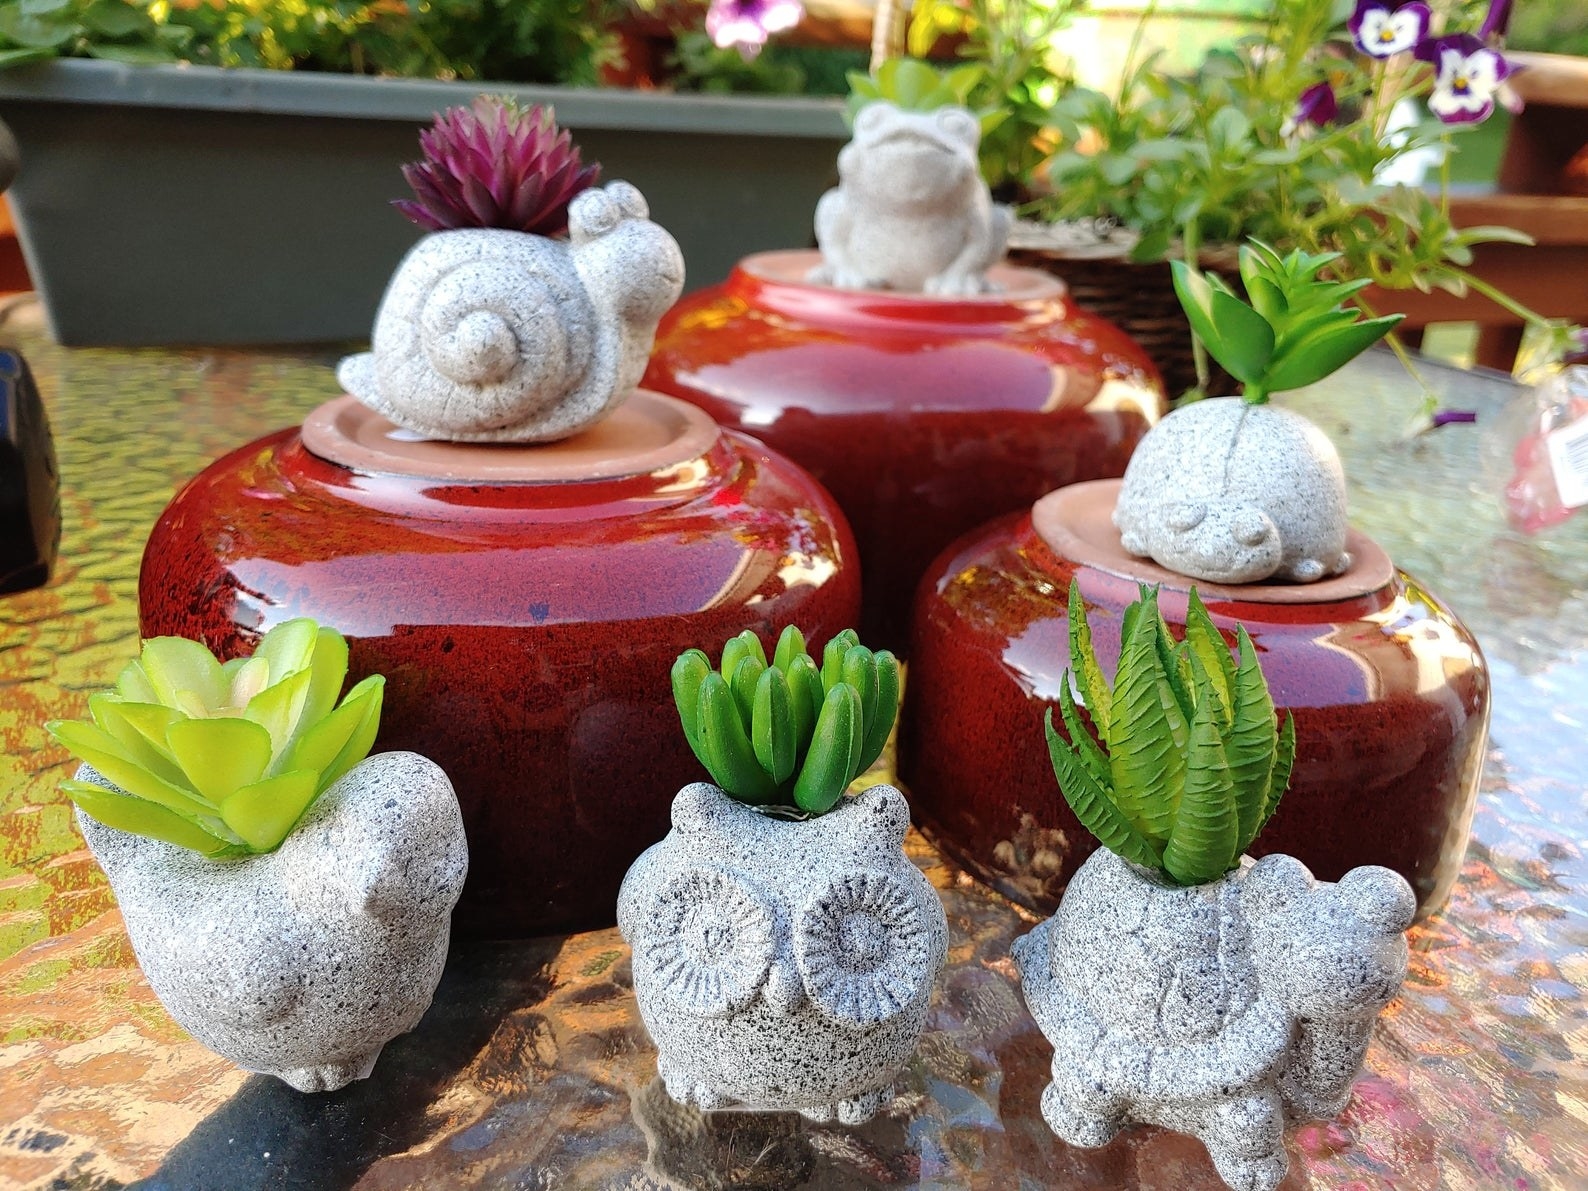 Six faux succulents in planters shaped like an owl, turtle, snail, frog, bird, and lady bug